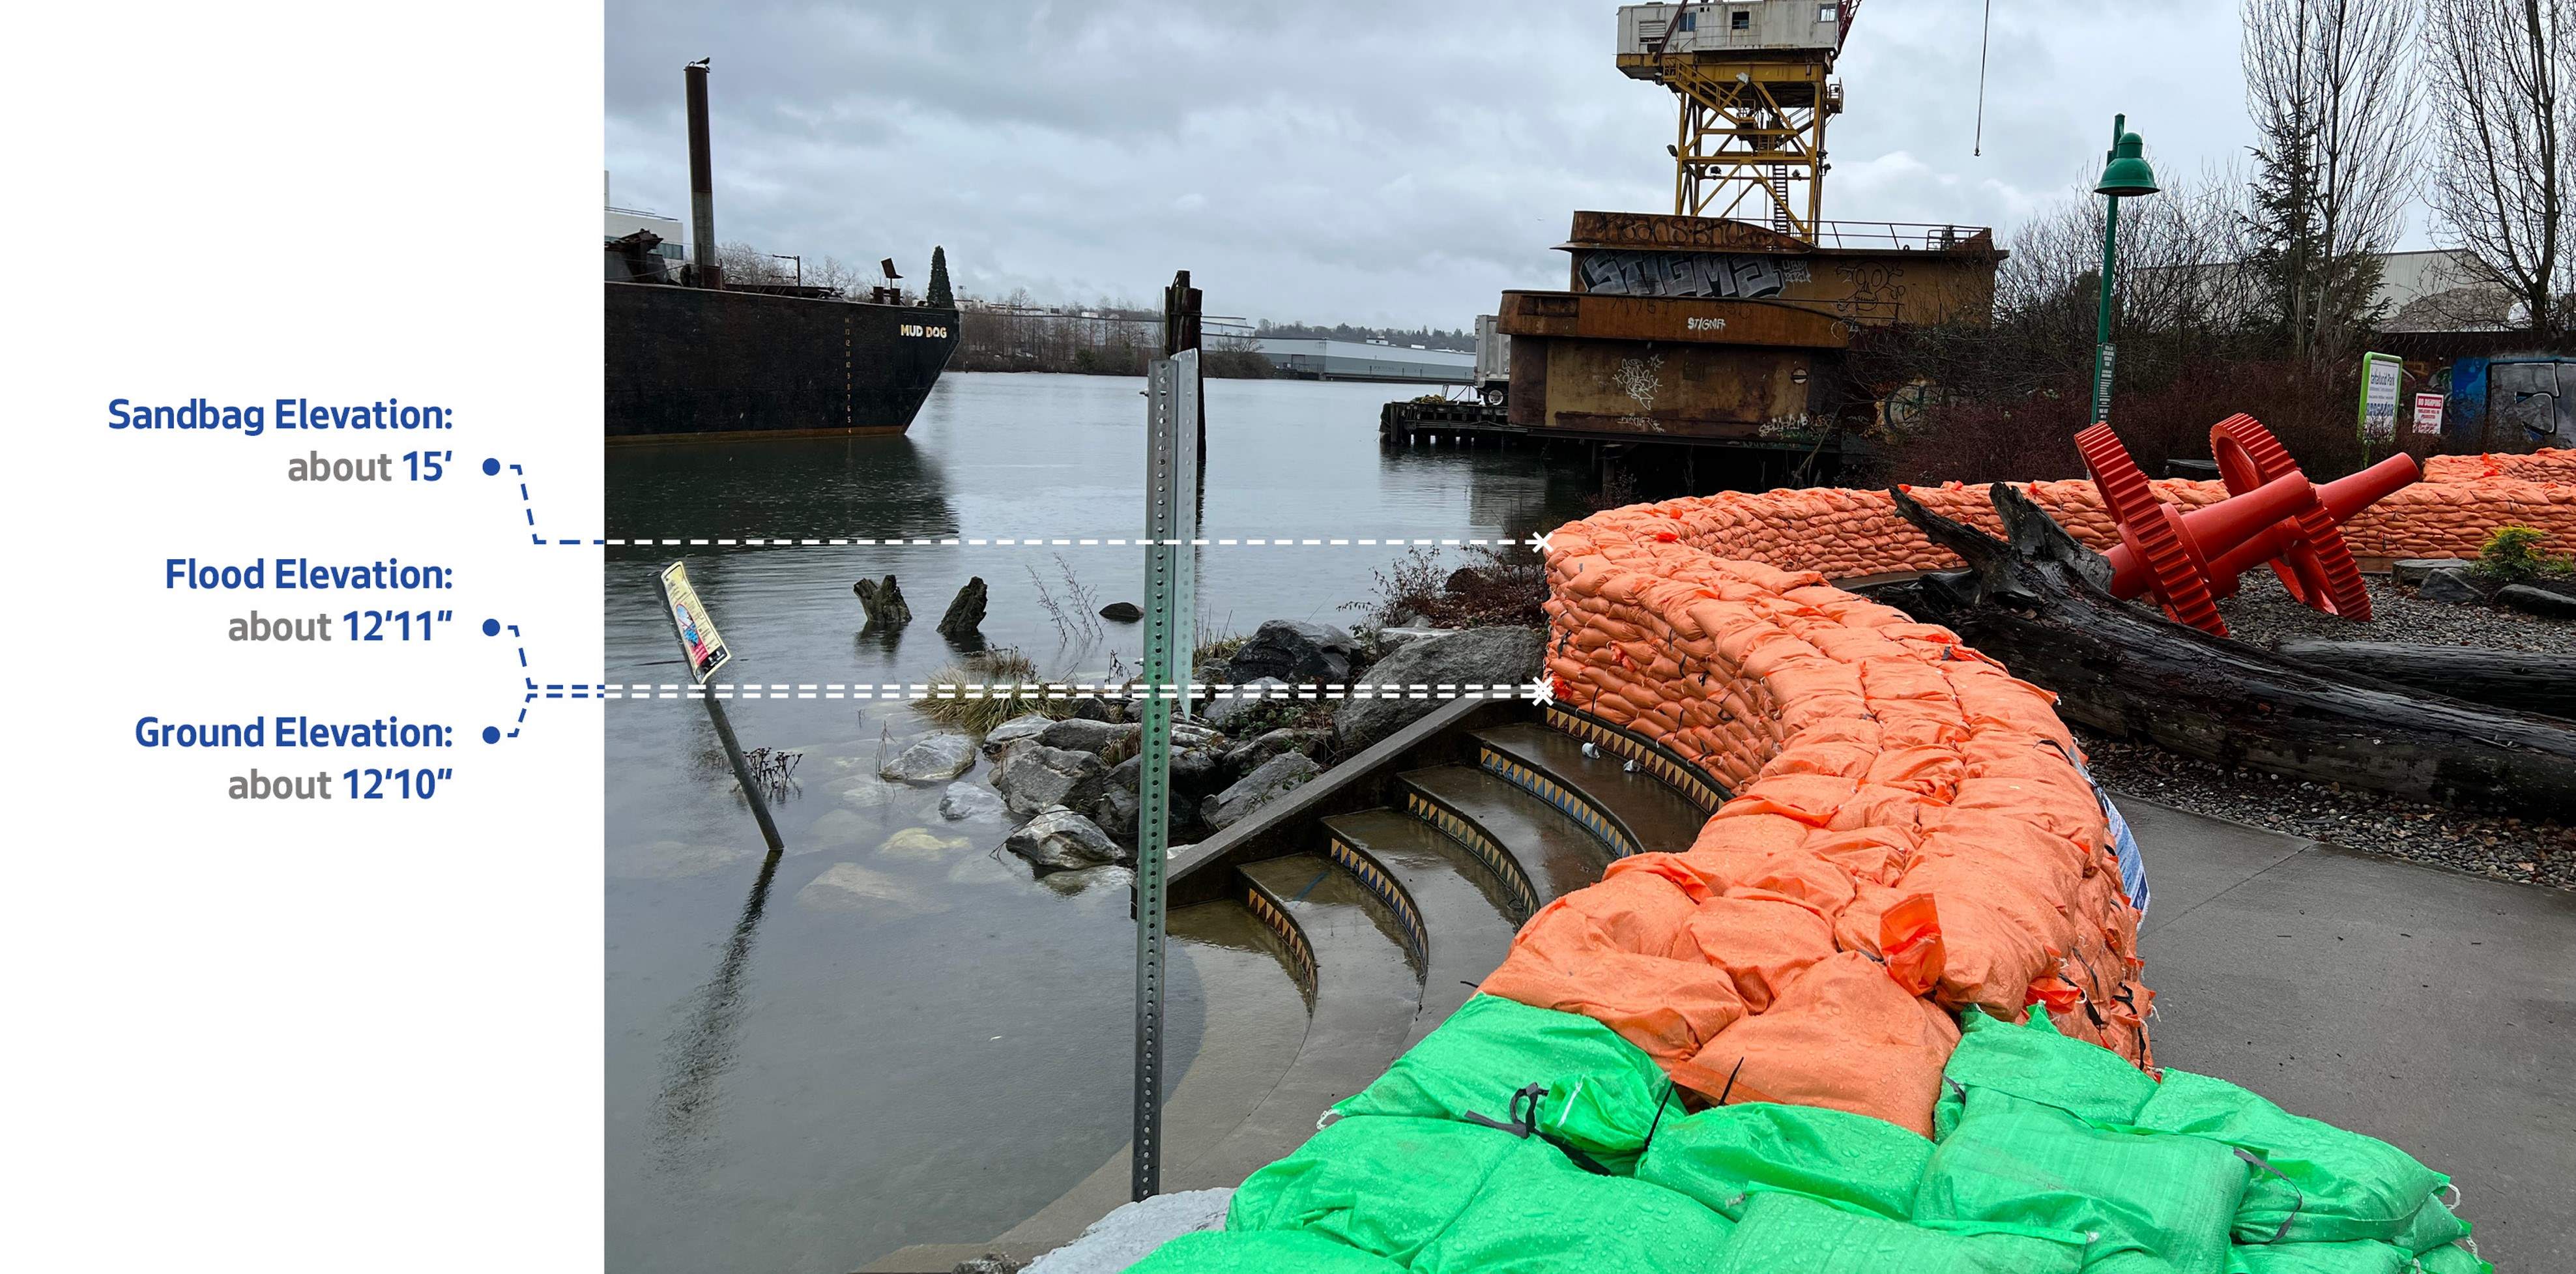 Sand bags stacked along the edge of the Duwamish River in South Park after the flooding in December 2022. SPU installed a semi-permanent flood barrier of sandbags to help mitigate the impacts of future flood events.